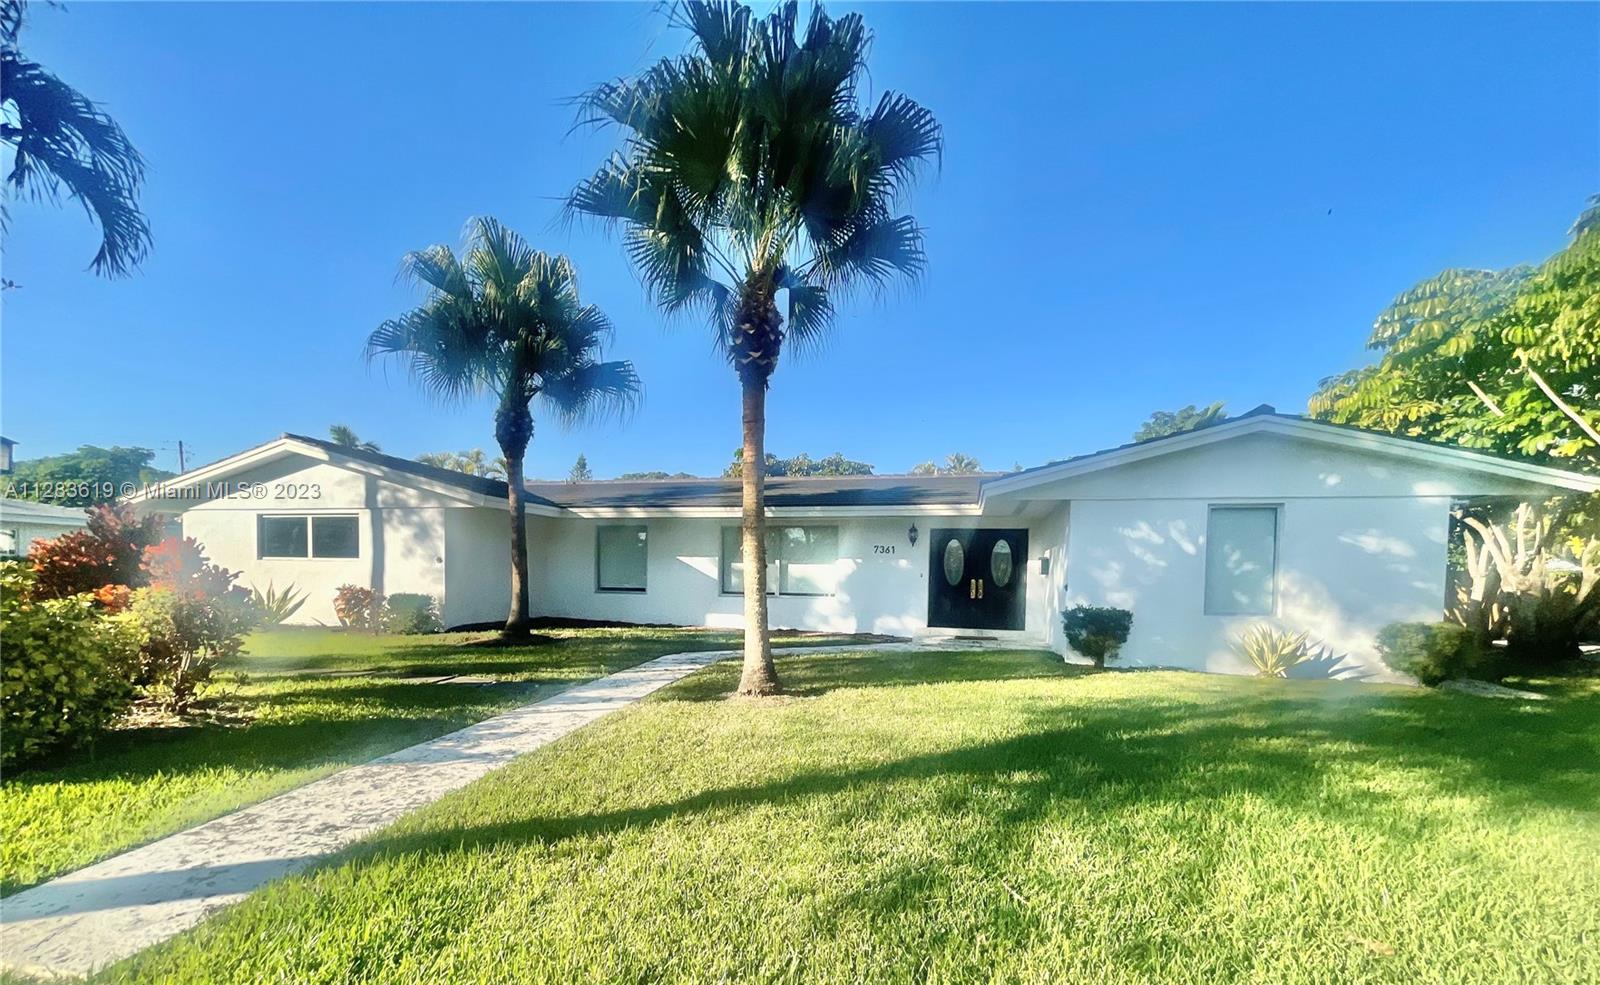 House is in a very desirable neighborhood in Pinecrest.    Hurricane impact windows, marble floors, built in closets, pool and more. Excellent schools  Palmetto Elementary, Palmetto Middle and walk-in distance to Miami Palmetto High School.   Easy to show see brokers remarks.